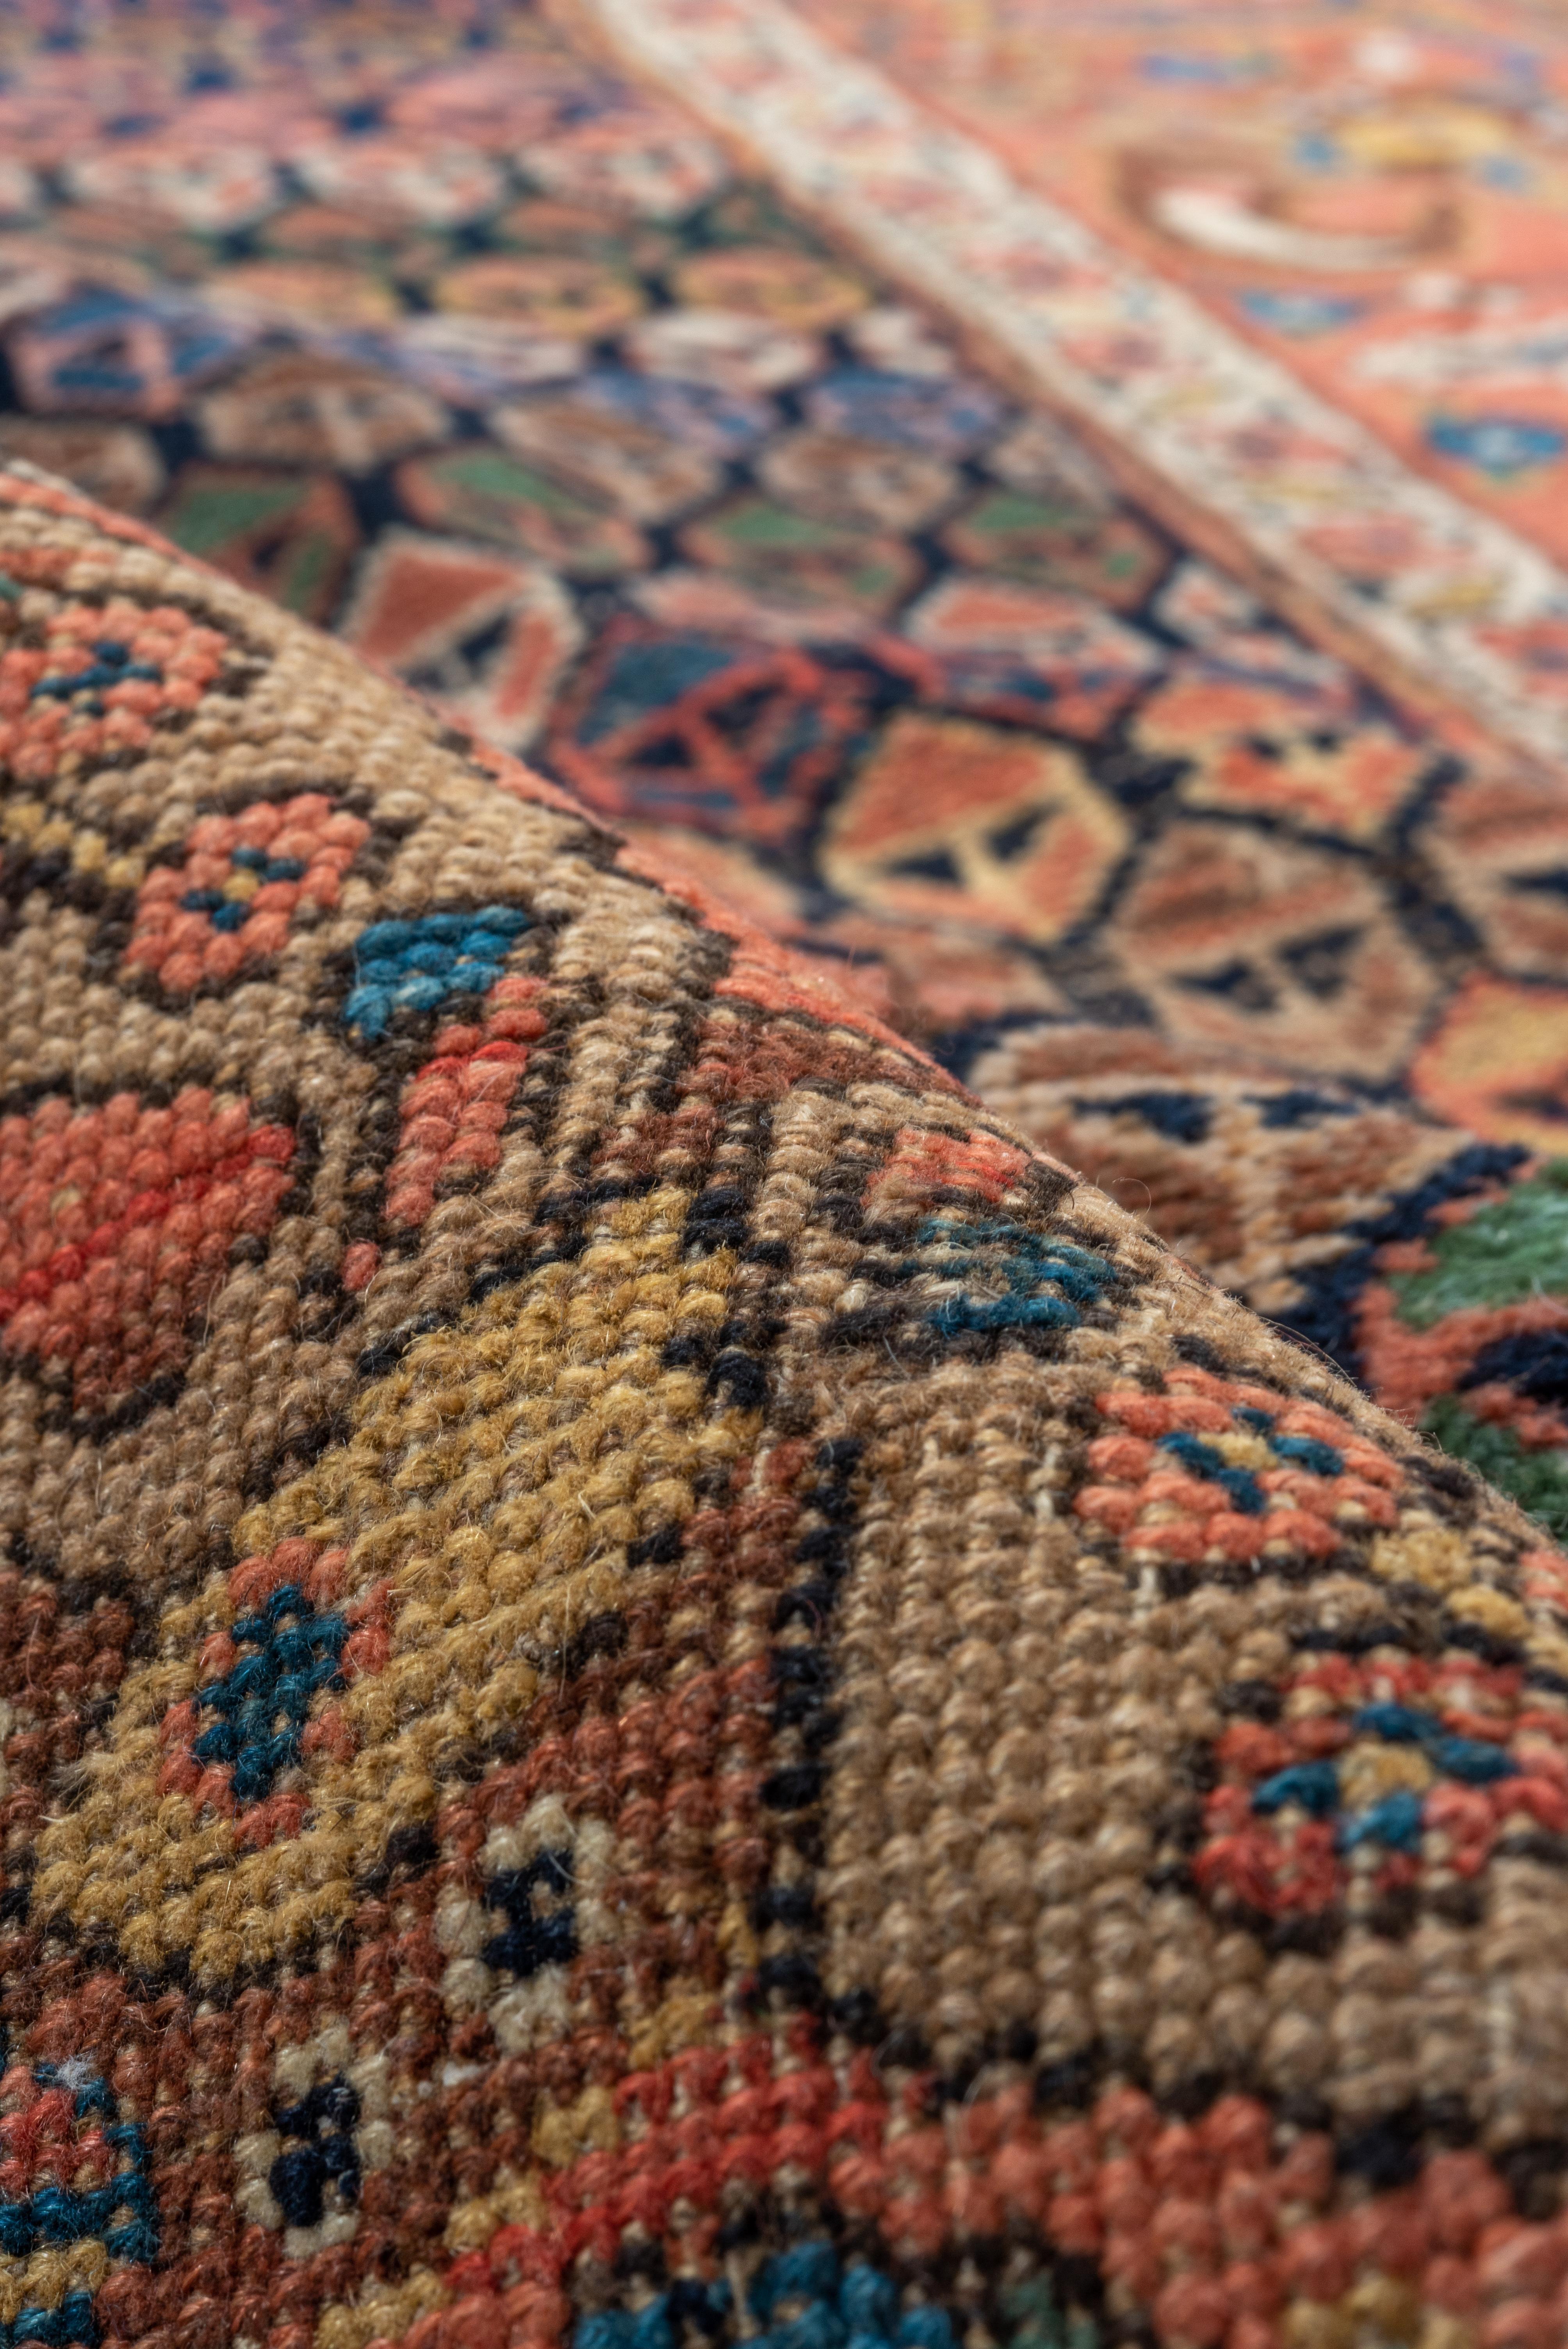 Early 20th Century Eliko RUgs by David Ariel Beautiful Antique Bidjar Runner with Bold Colors For Sale